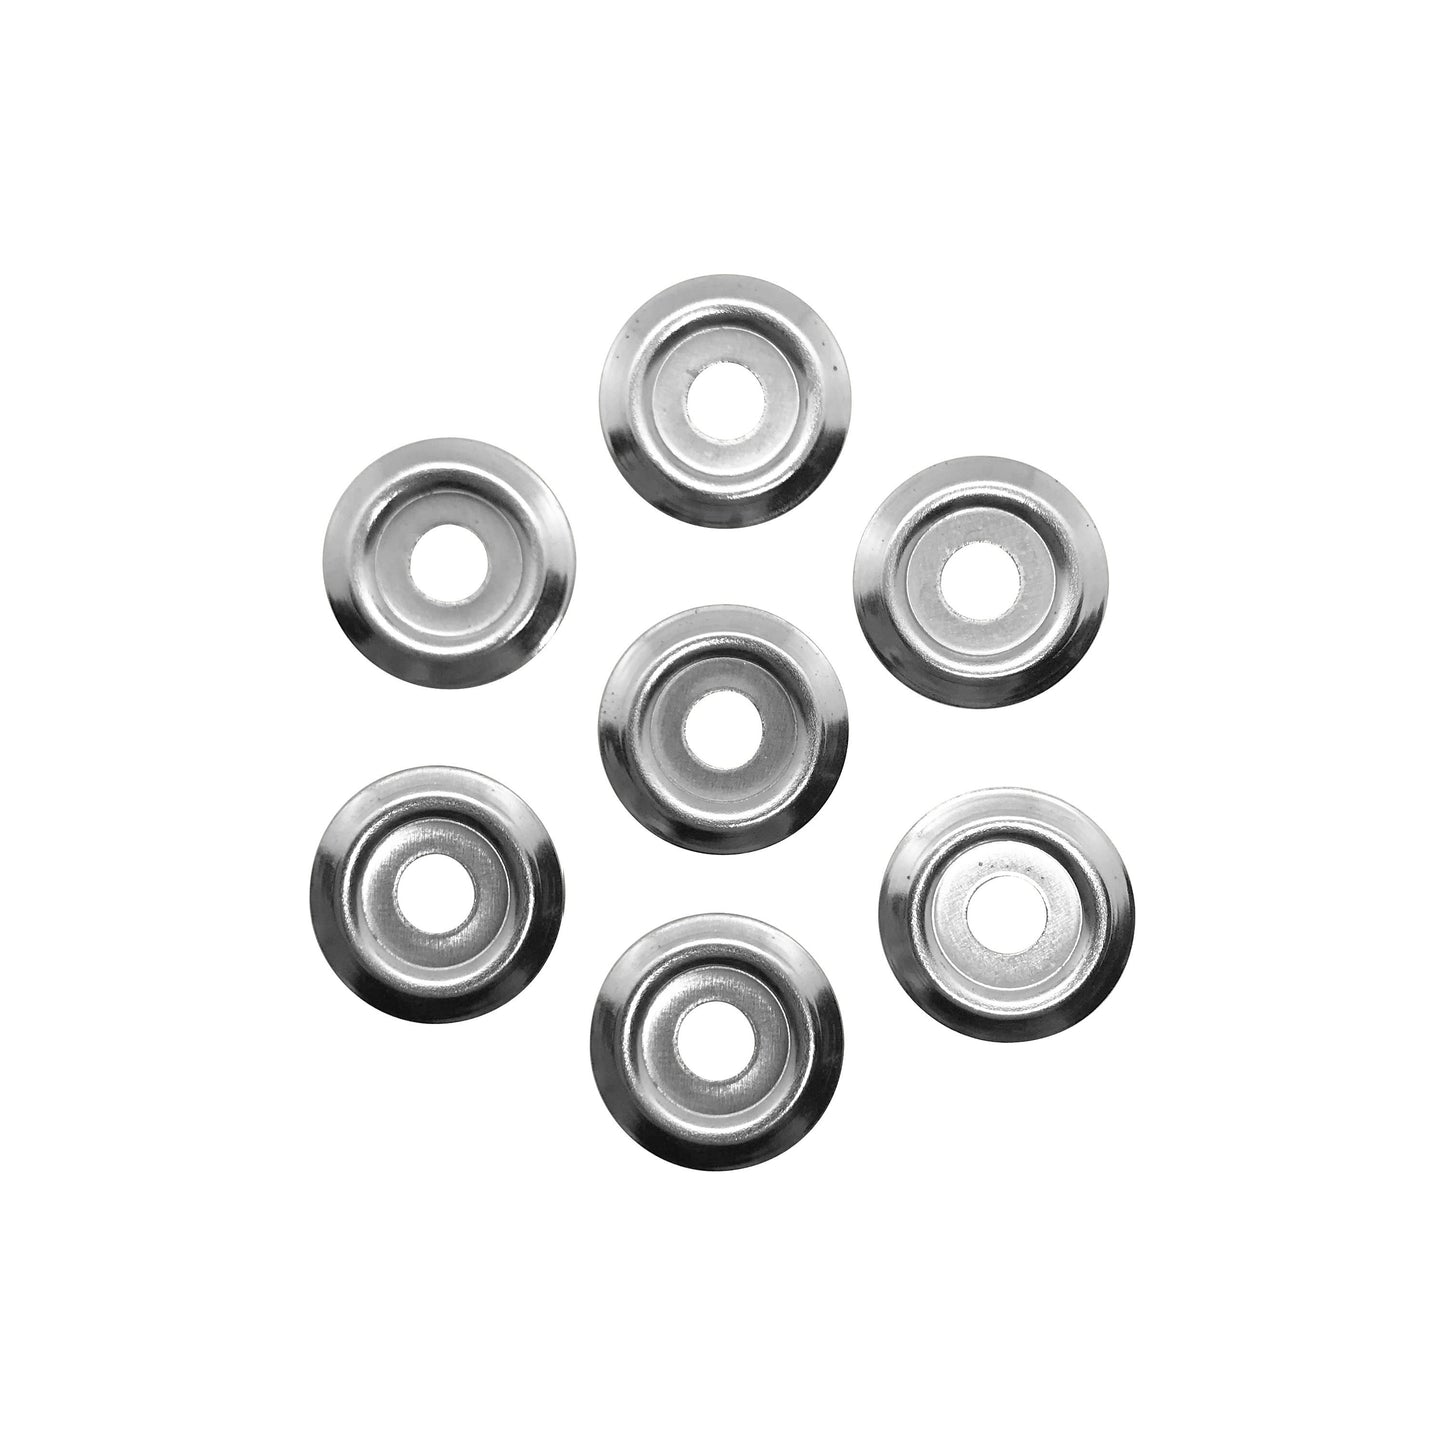 A collection of Binding Screw Washers - Silver / Nickel by Gobrecht & Ulrich